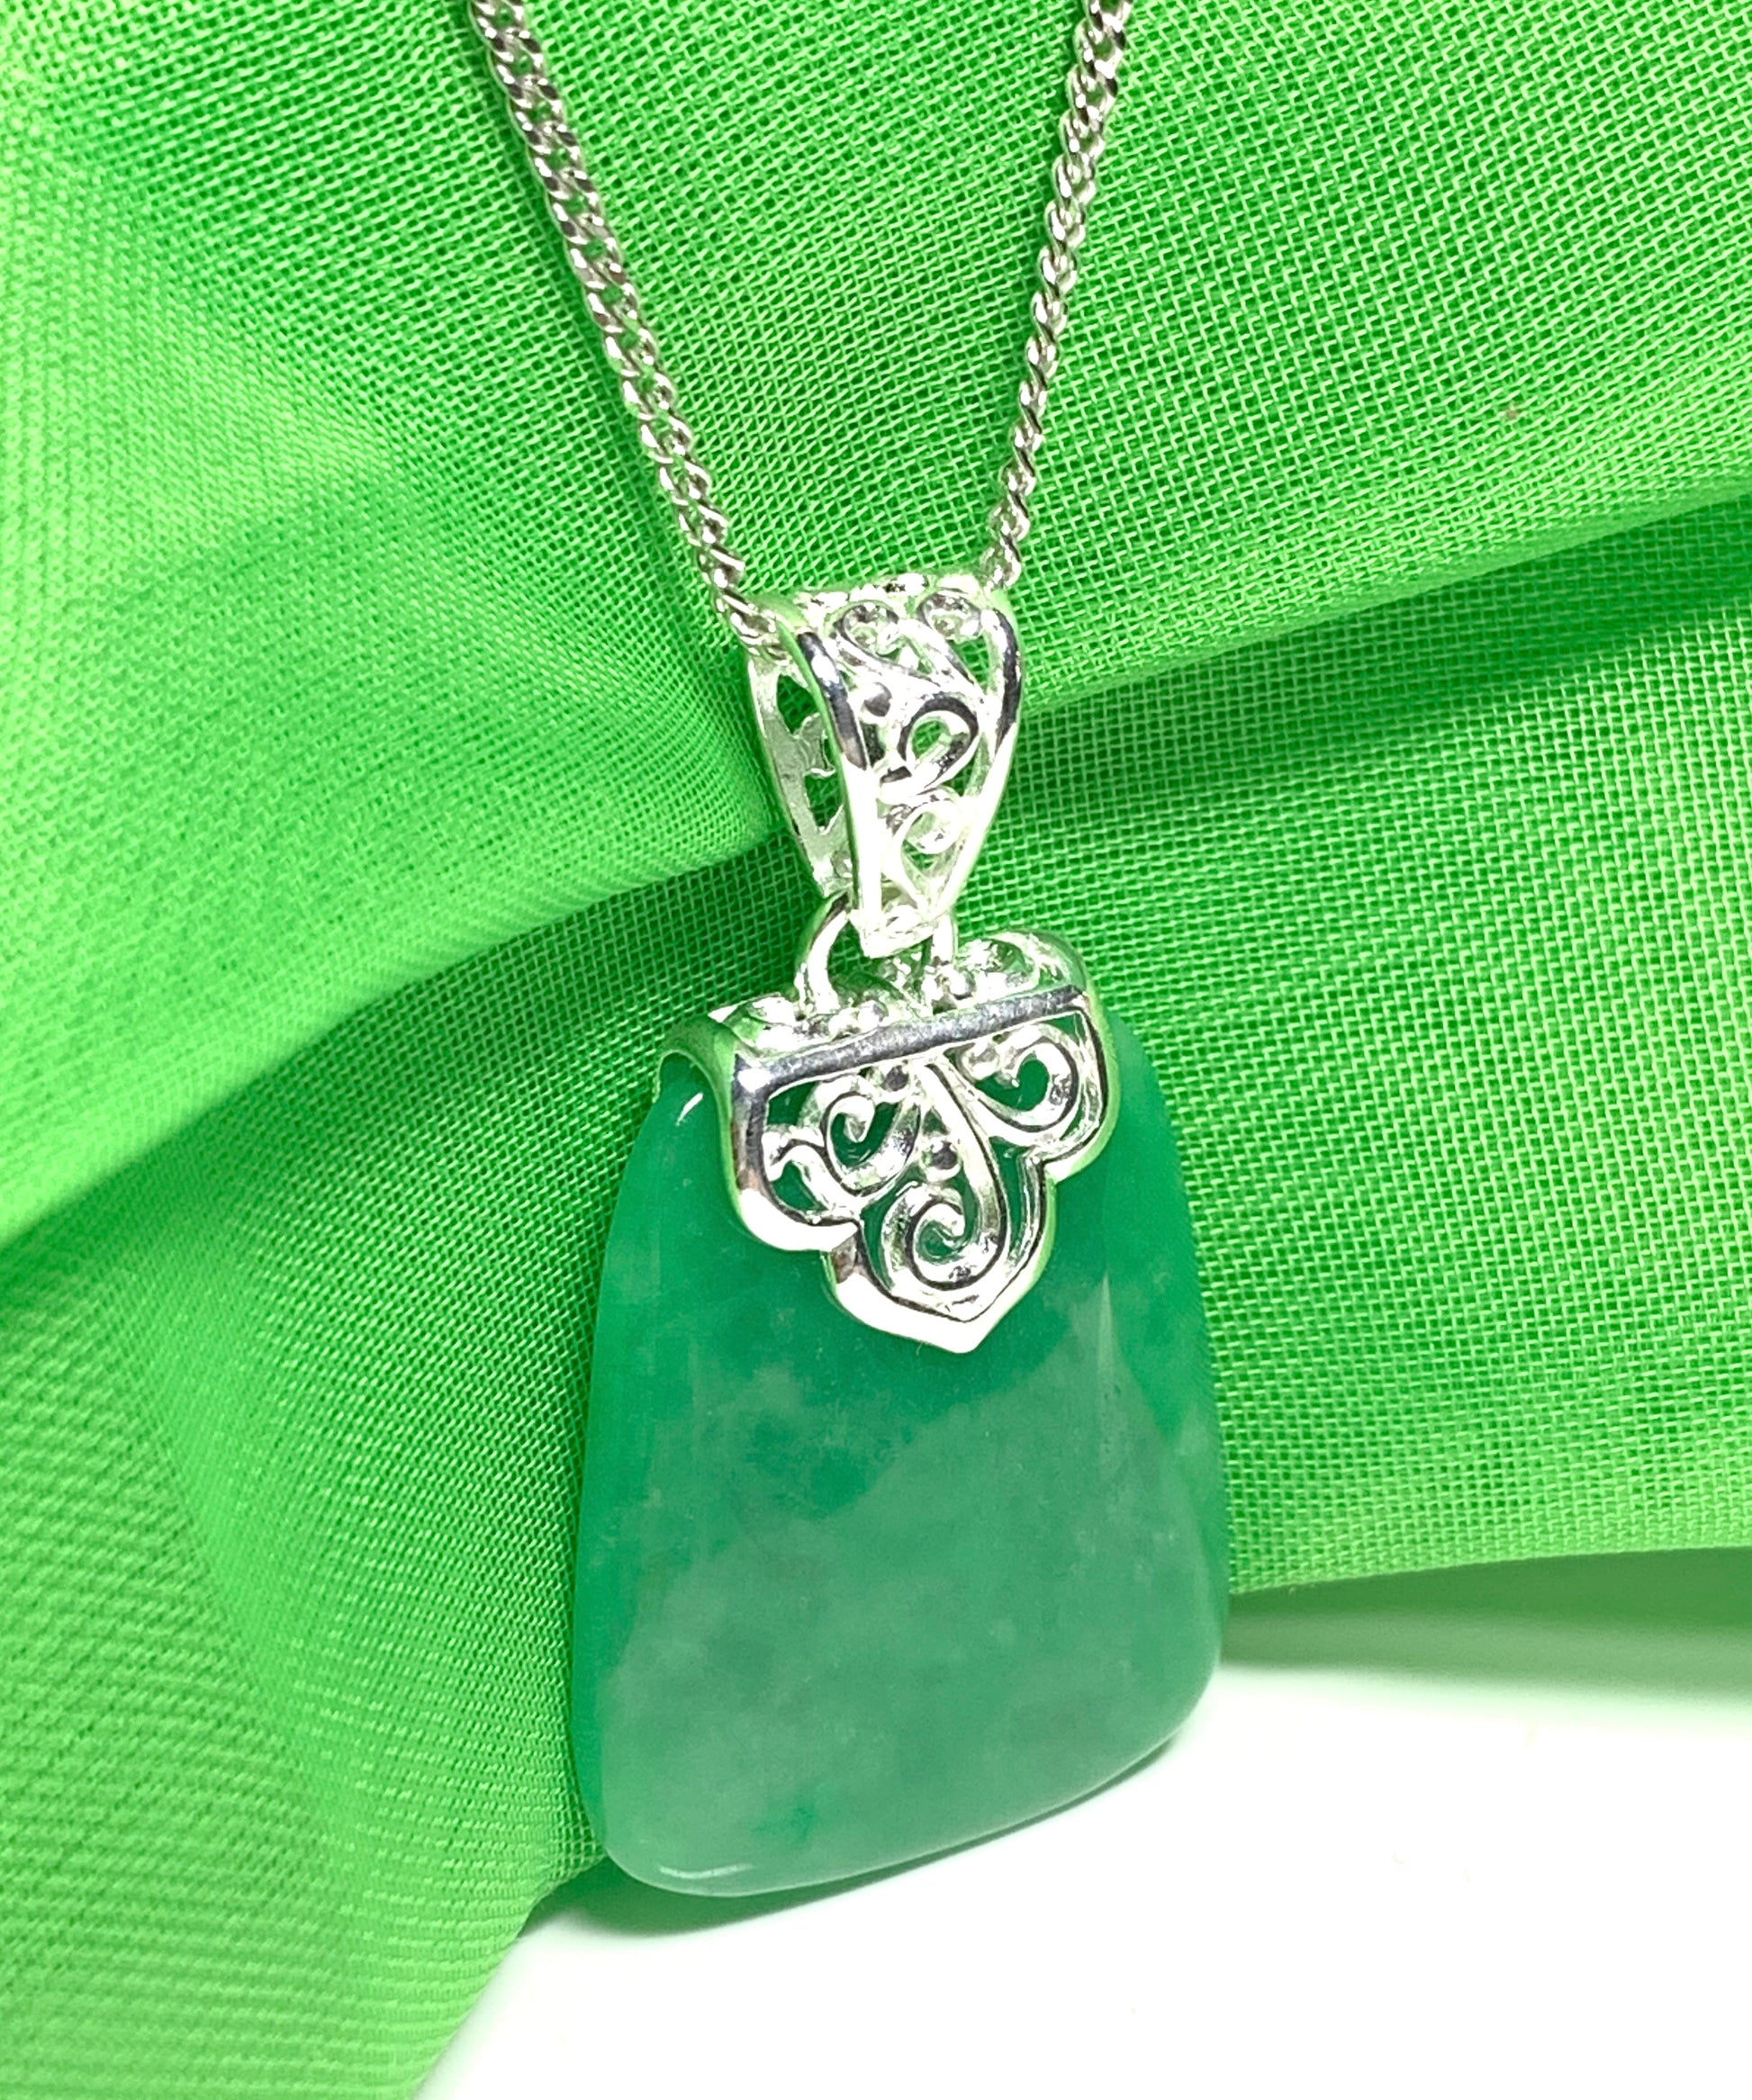 Real jade necklace dark green sterling silver cushion shaped